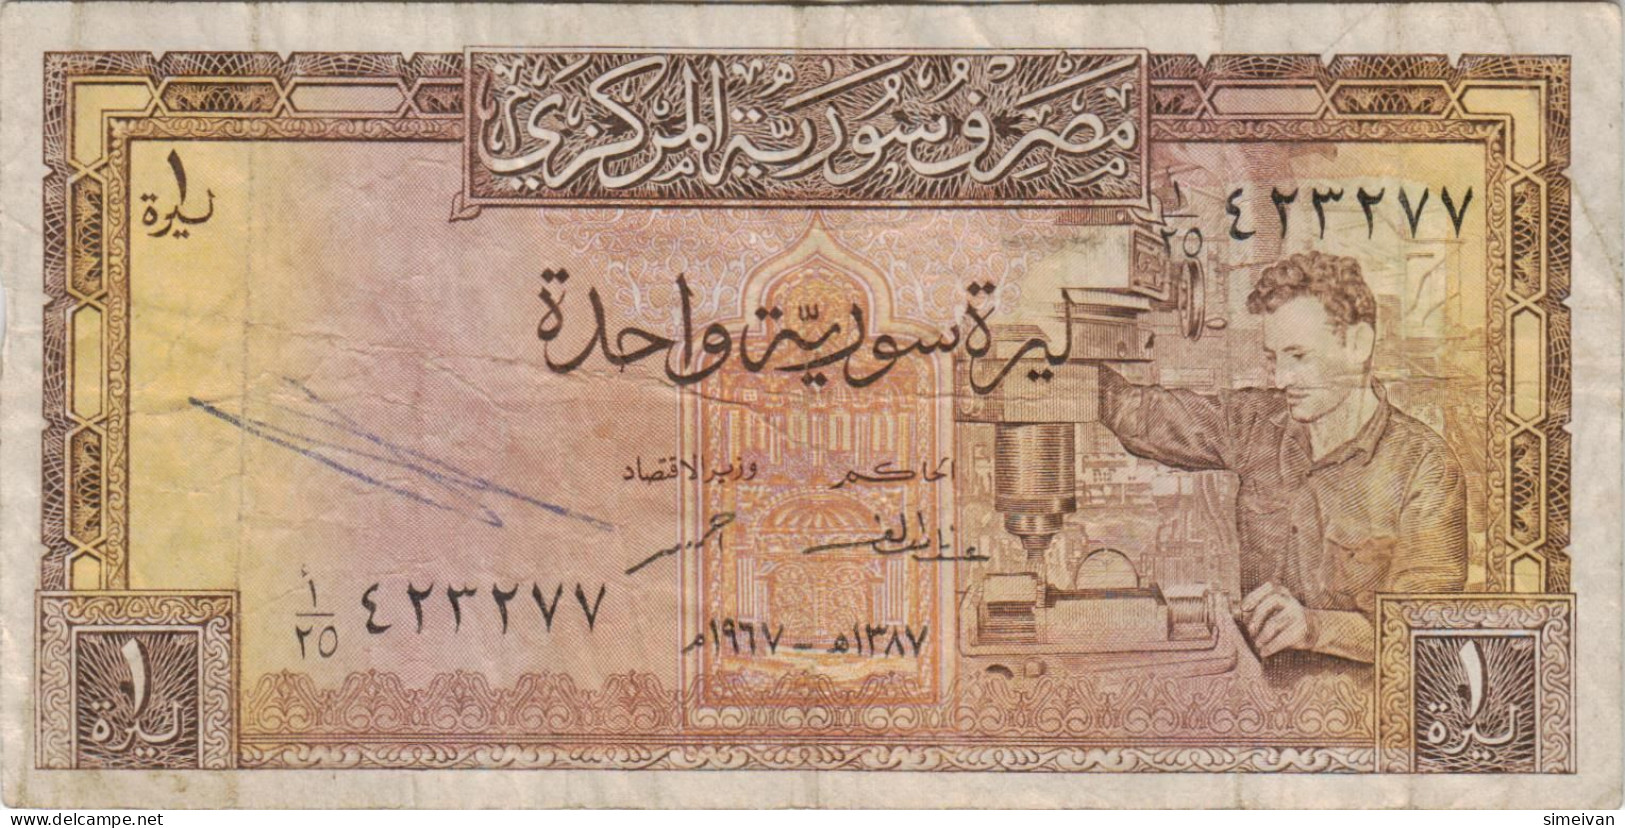 Syria 1 Pound 1967 P-93b Banknote Middle East Currency Syrie Syrien #5341 - Syria